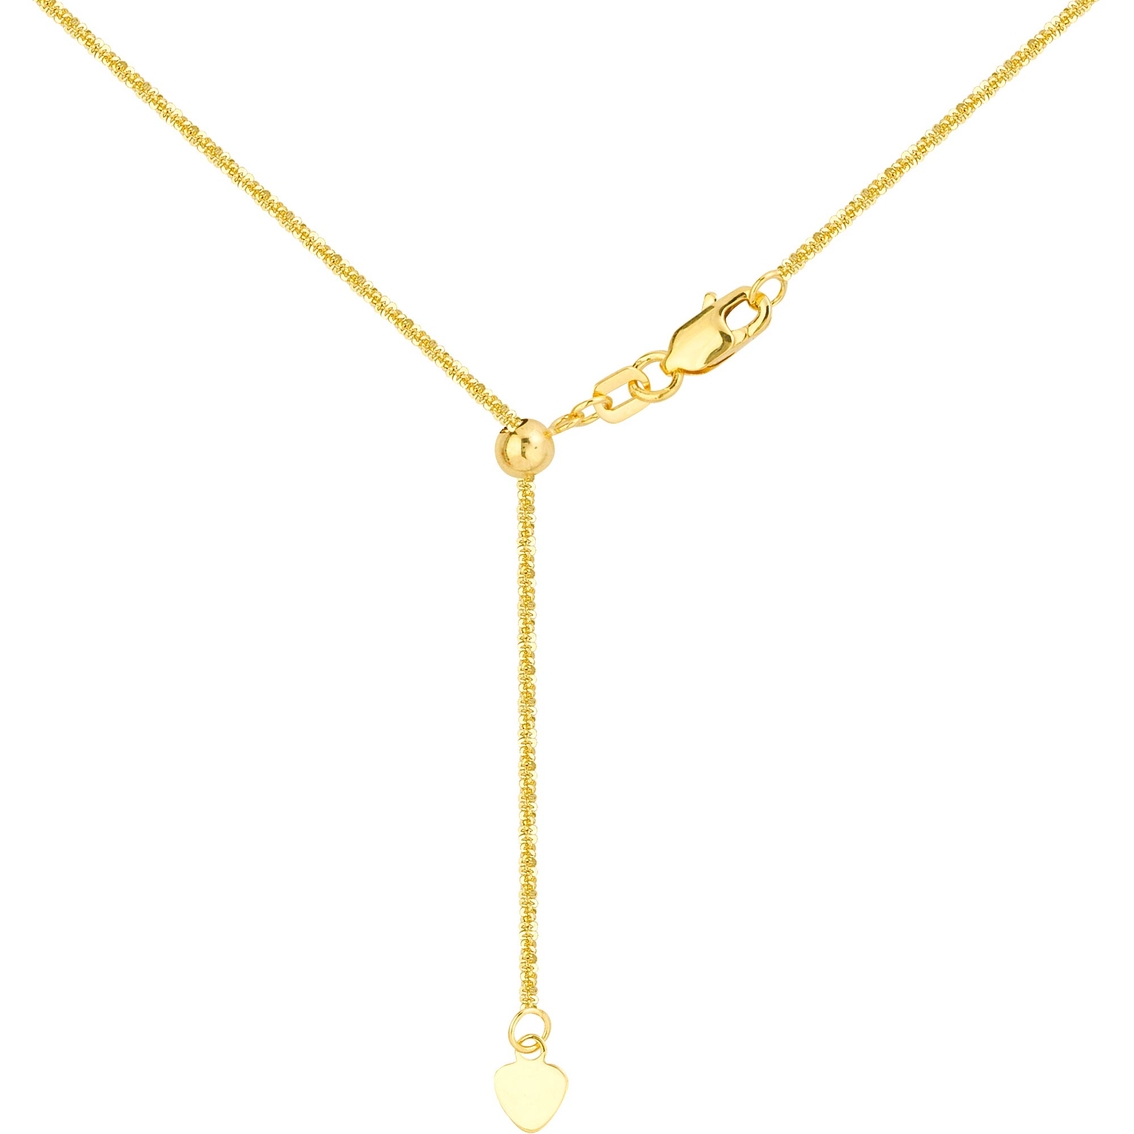 14K Gold 22 in. Adjustable Sparkle Chain - Image 4 of 4